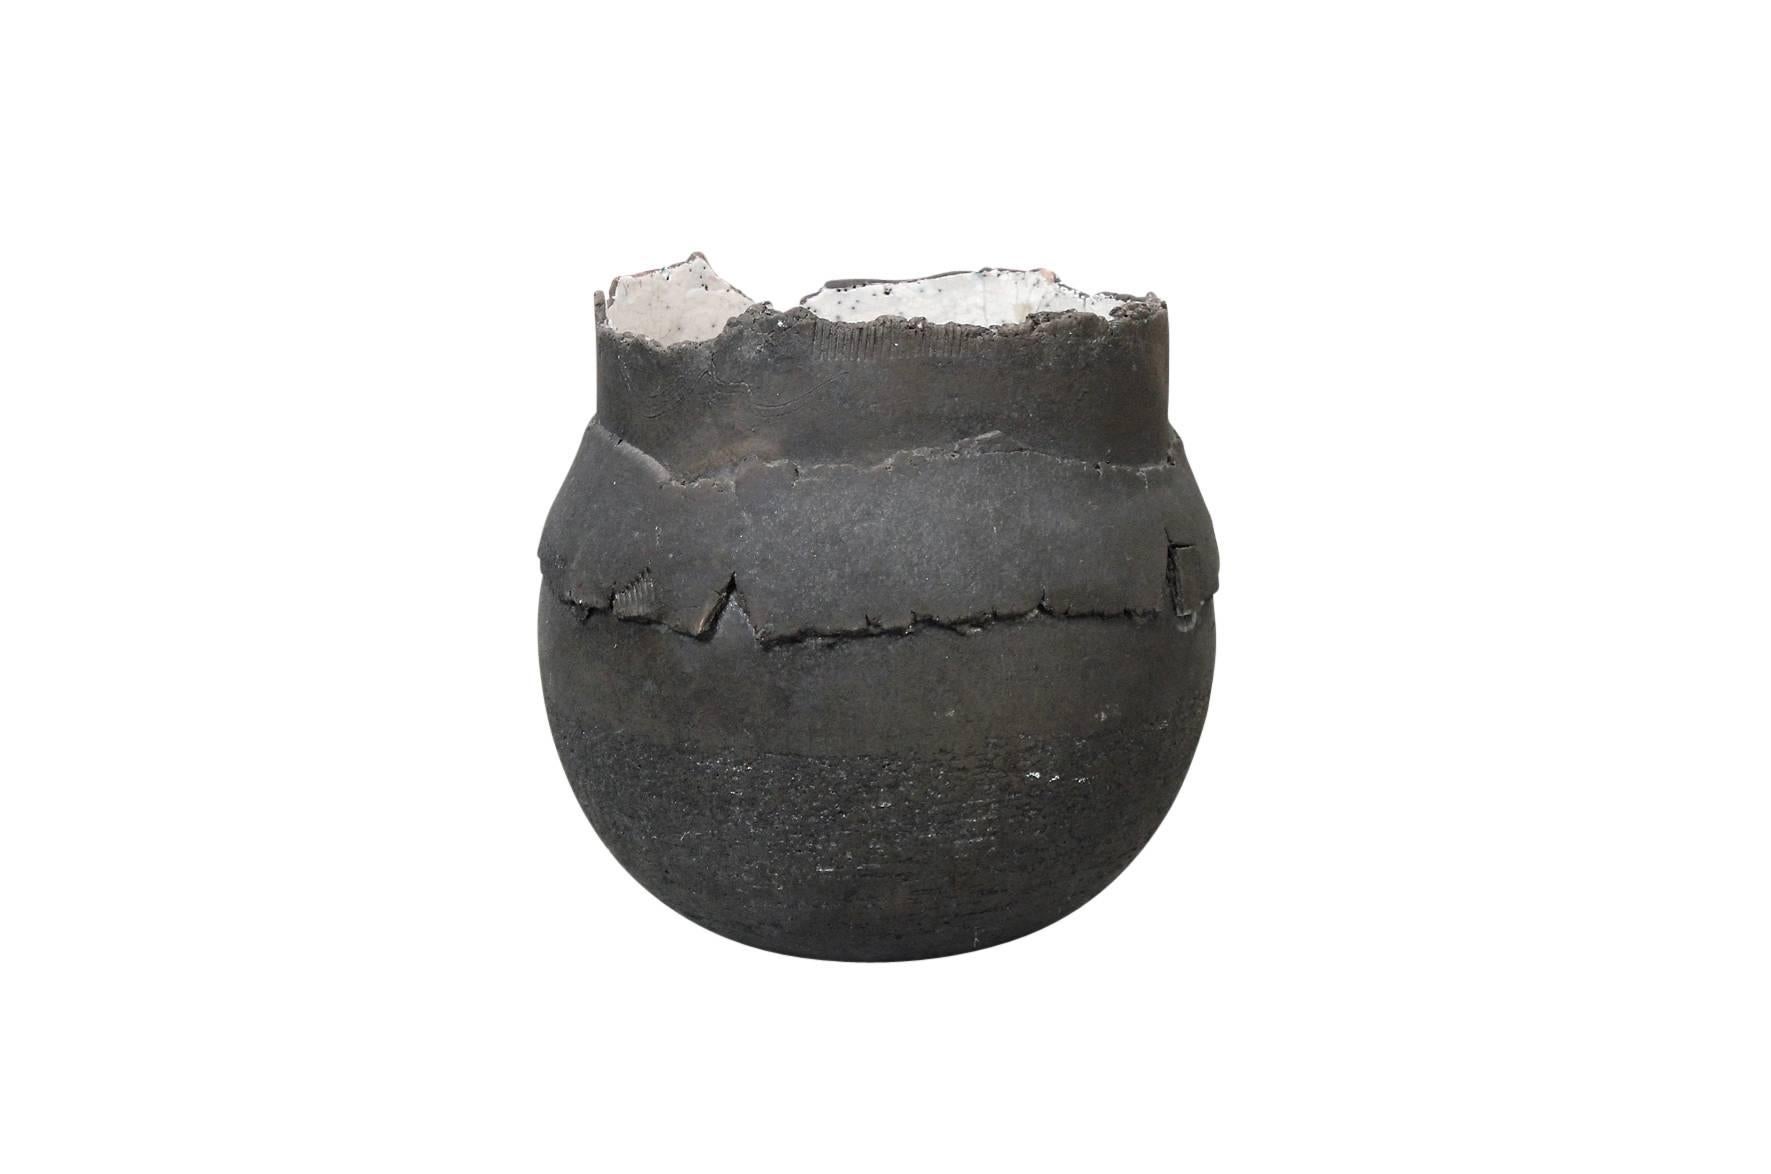 Early 1980s Brutalist Raku vessel by well noted German artist Dieter Balzer. In the 1980s before turning to painting and wood constructions, Balzer did a series of Raku vessels. This work has been confirmed by the artist. Its larger scale and